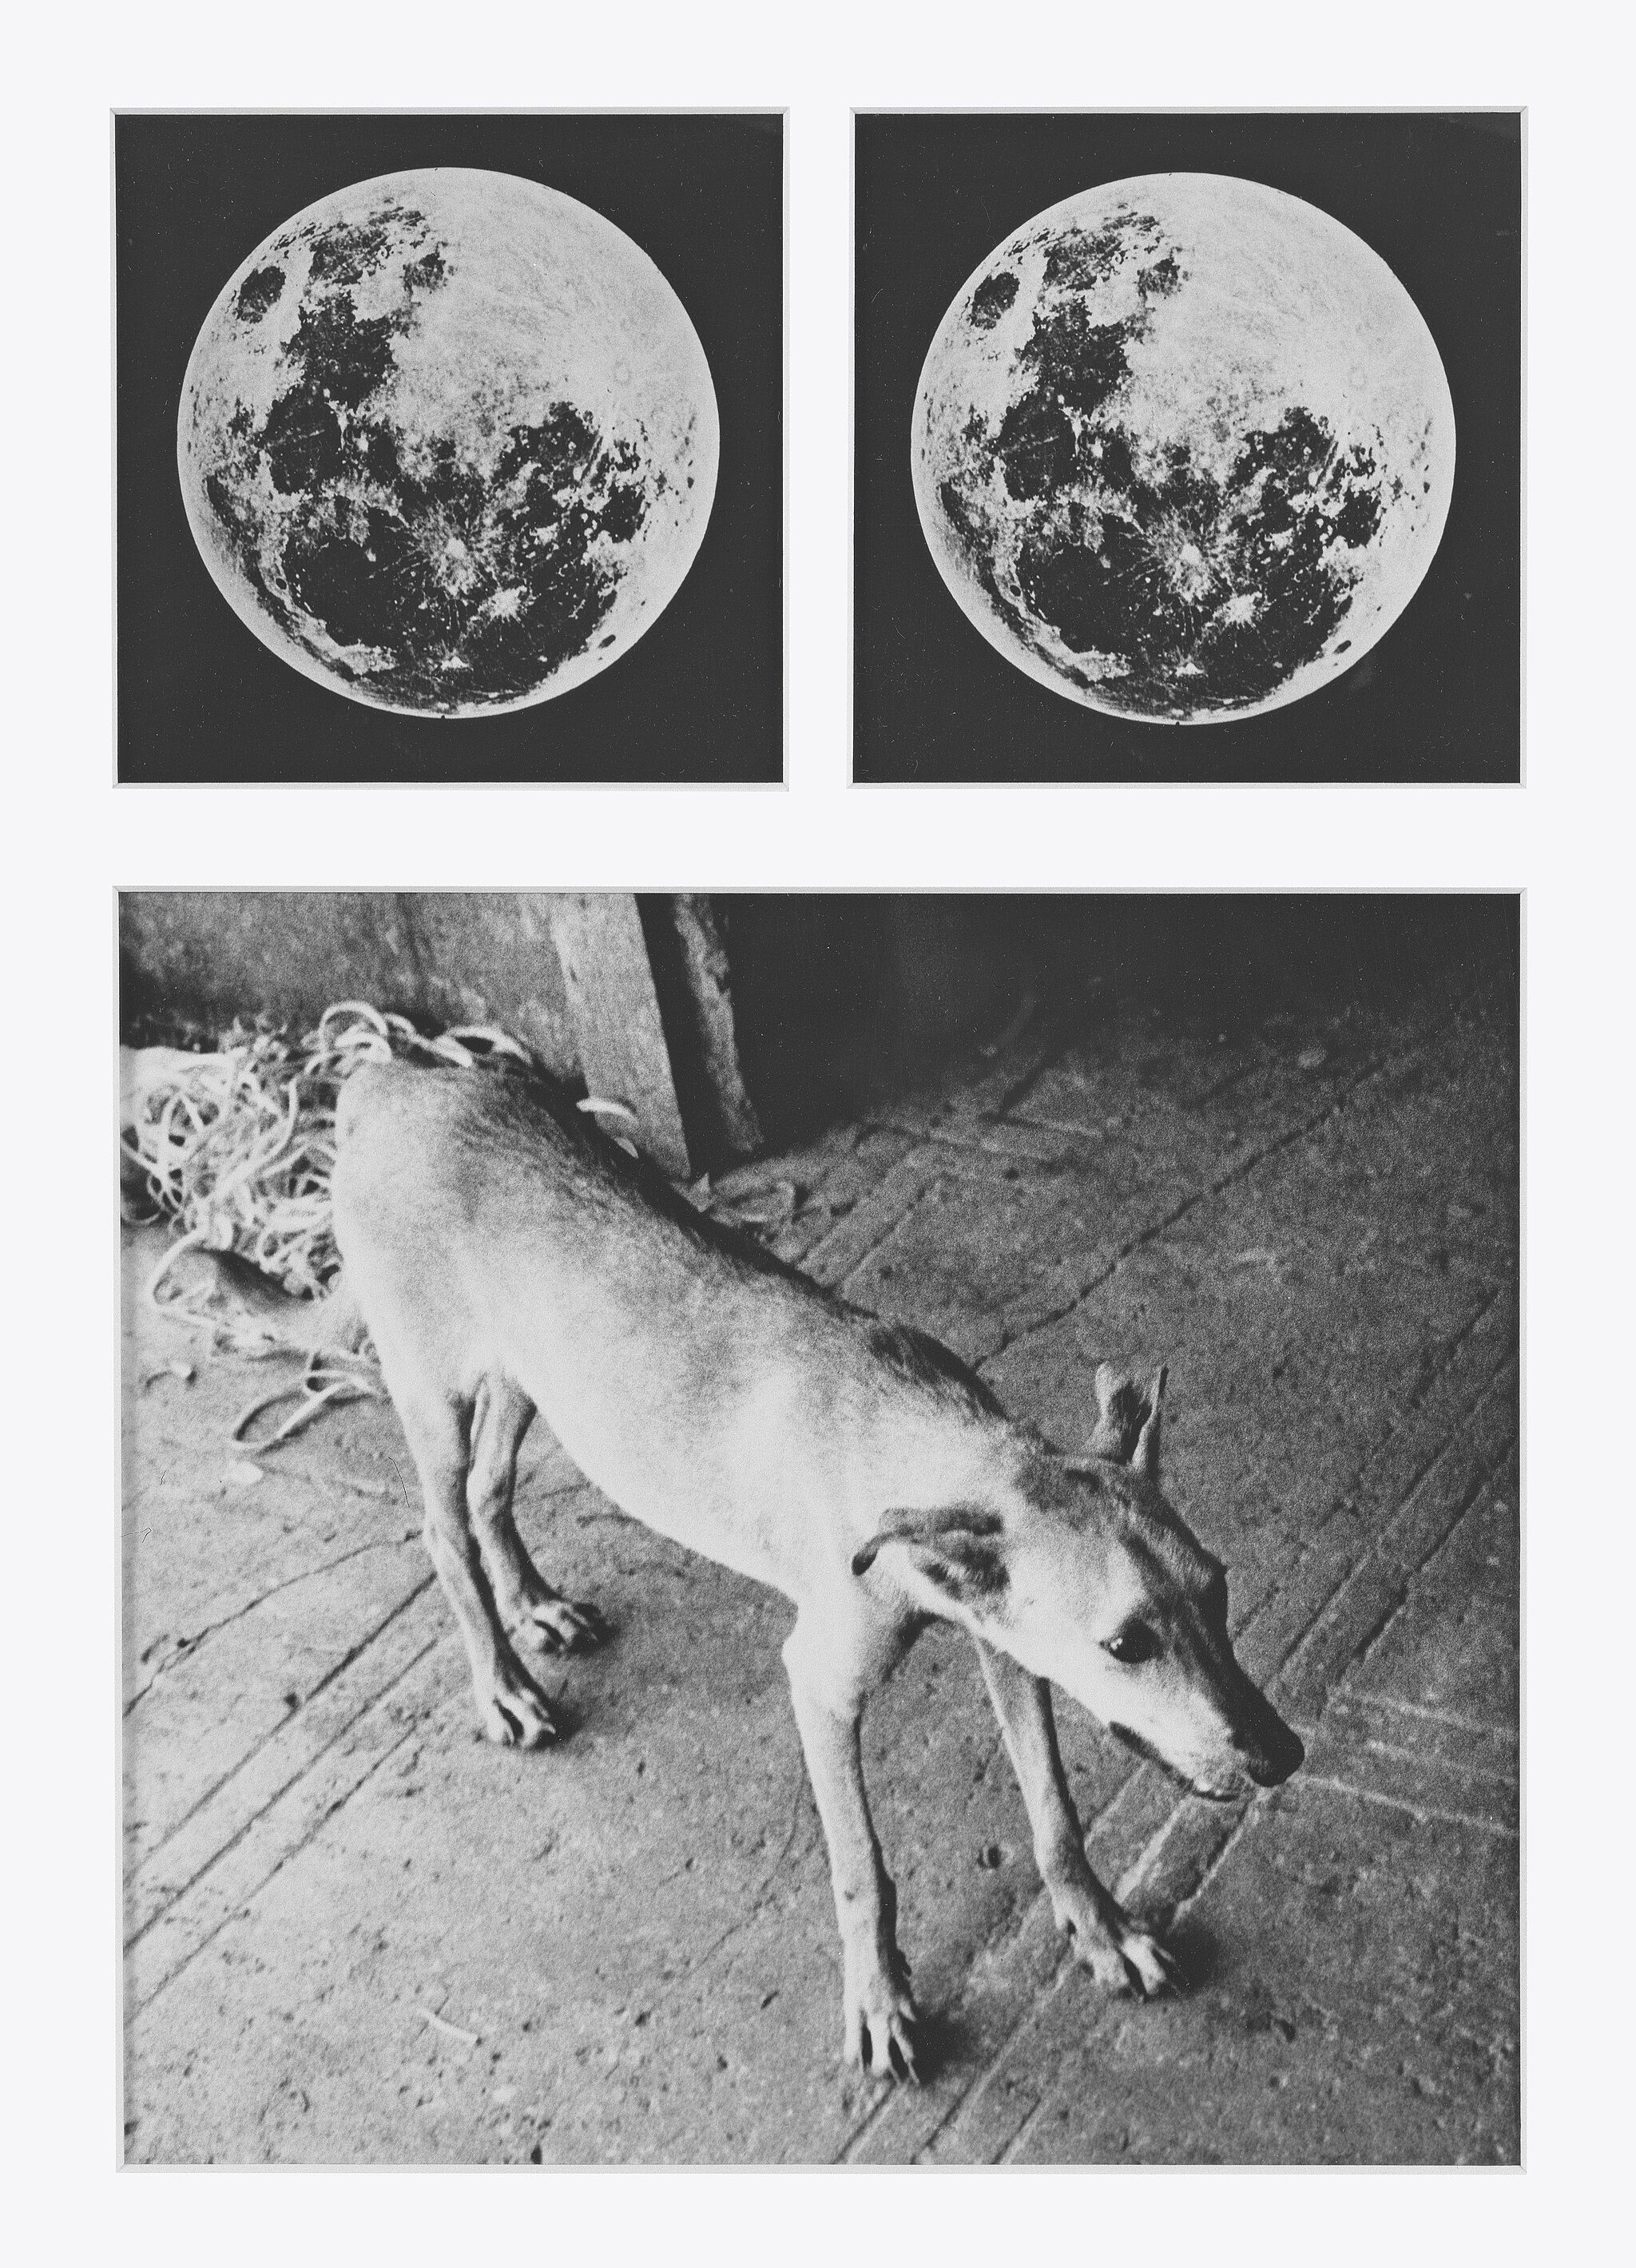 Pictures of dogs and the moon.